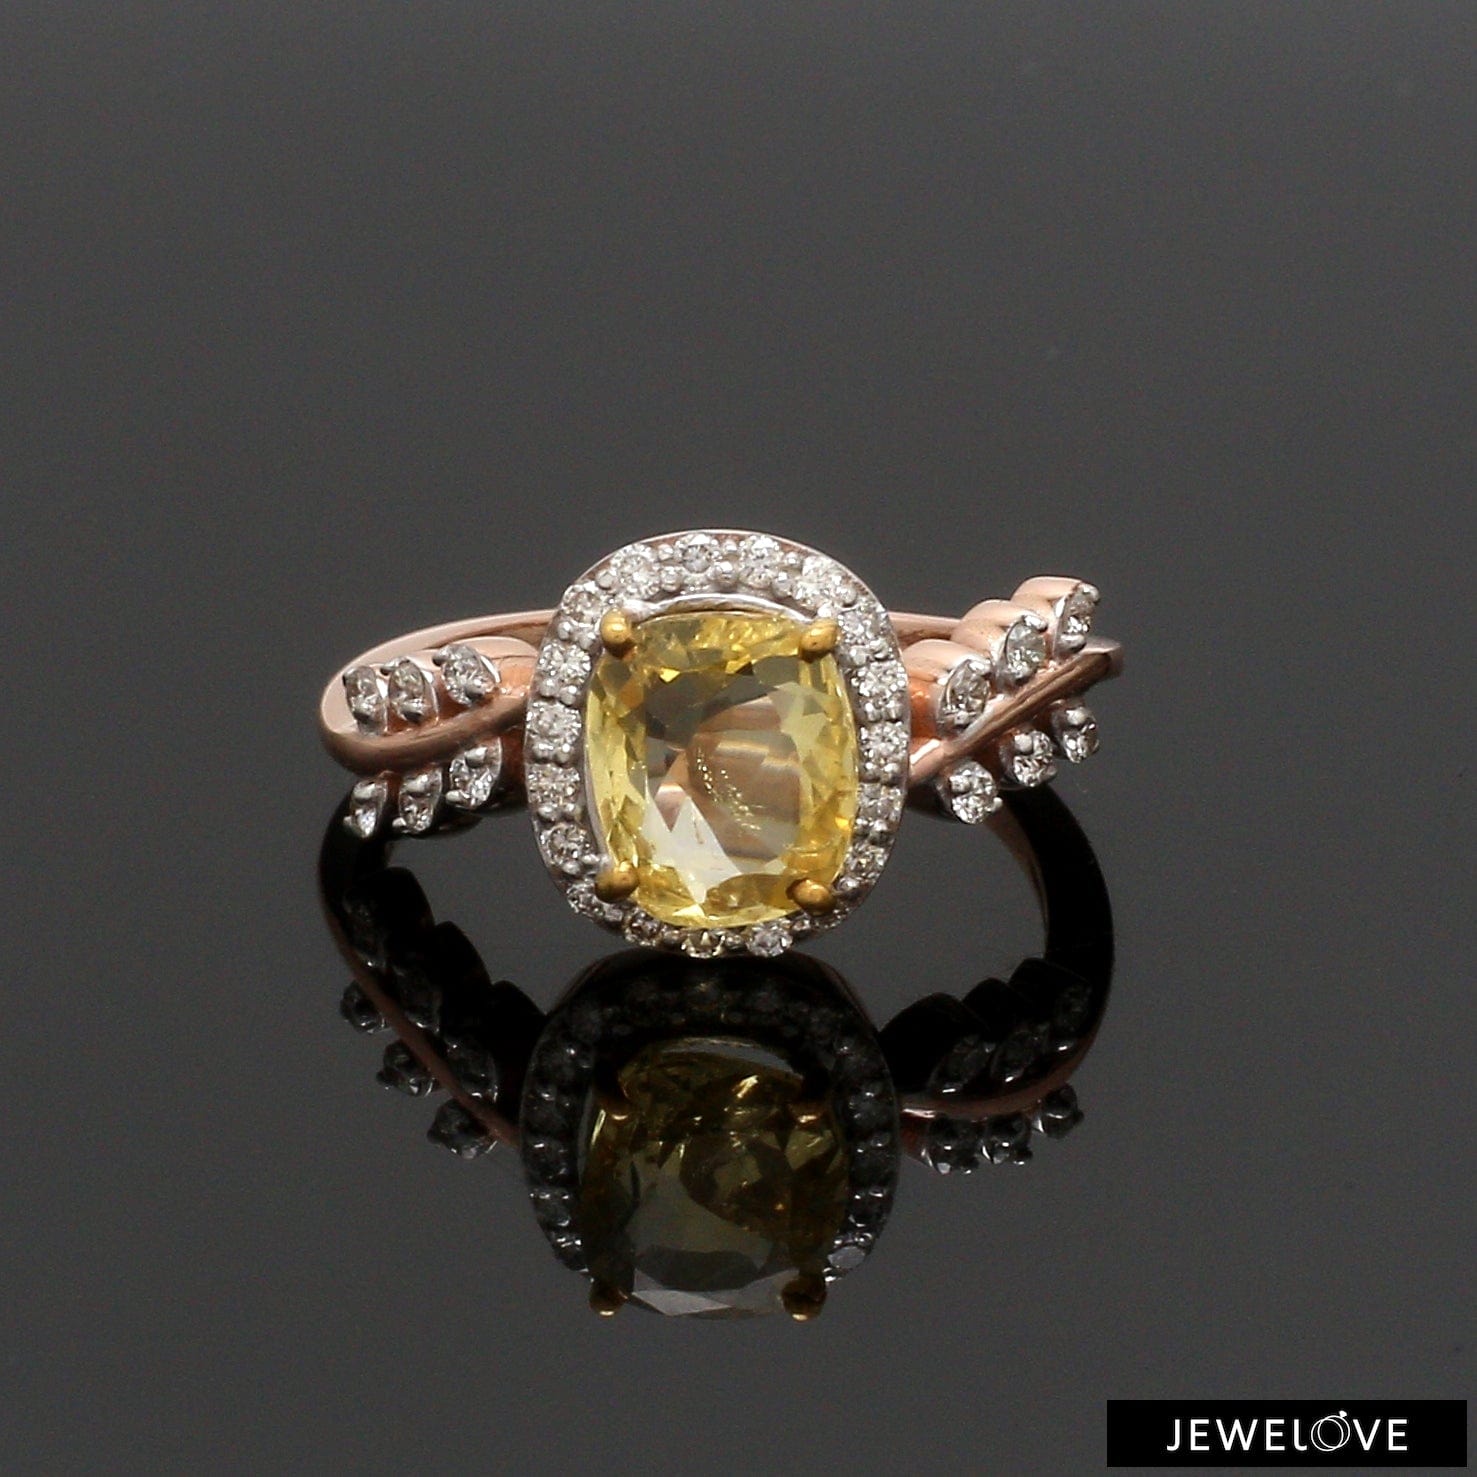 3.90 Carats Natural yellow Sapphire Ring in 18k Gold - Gleam Jewels